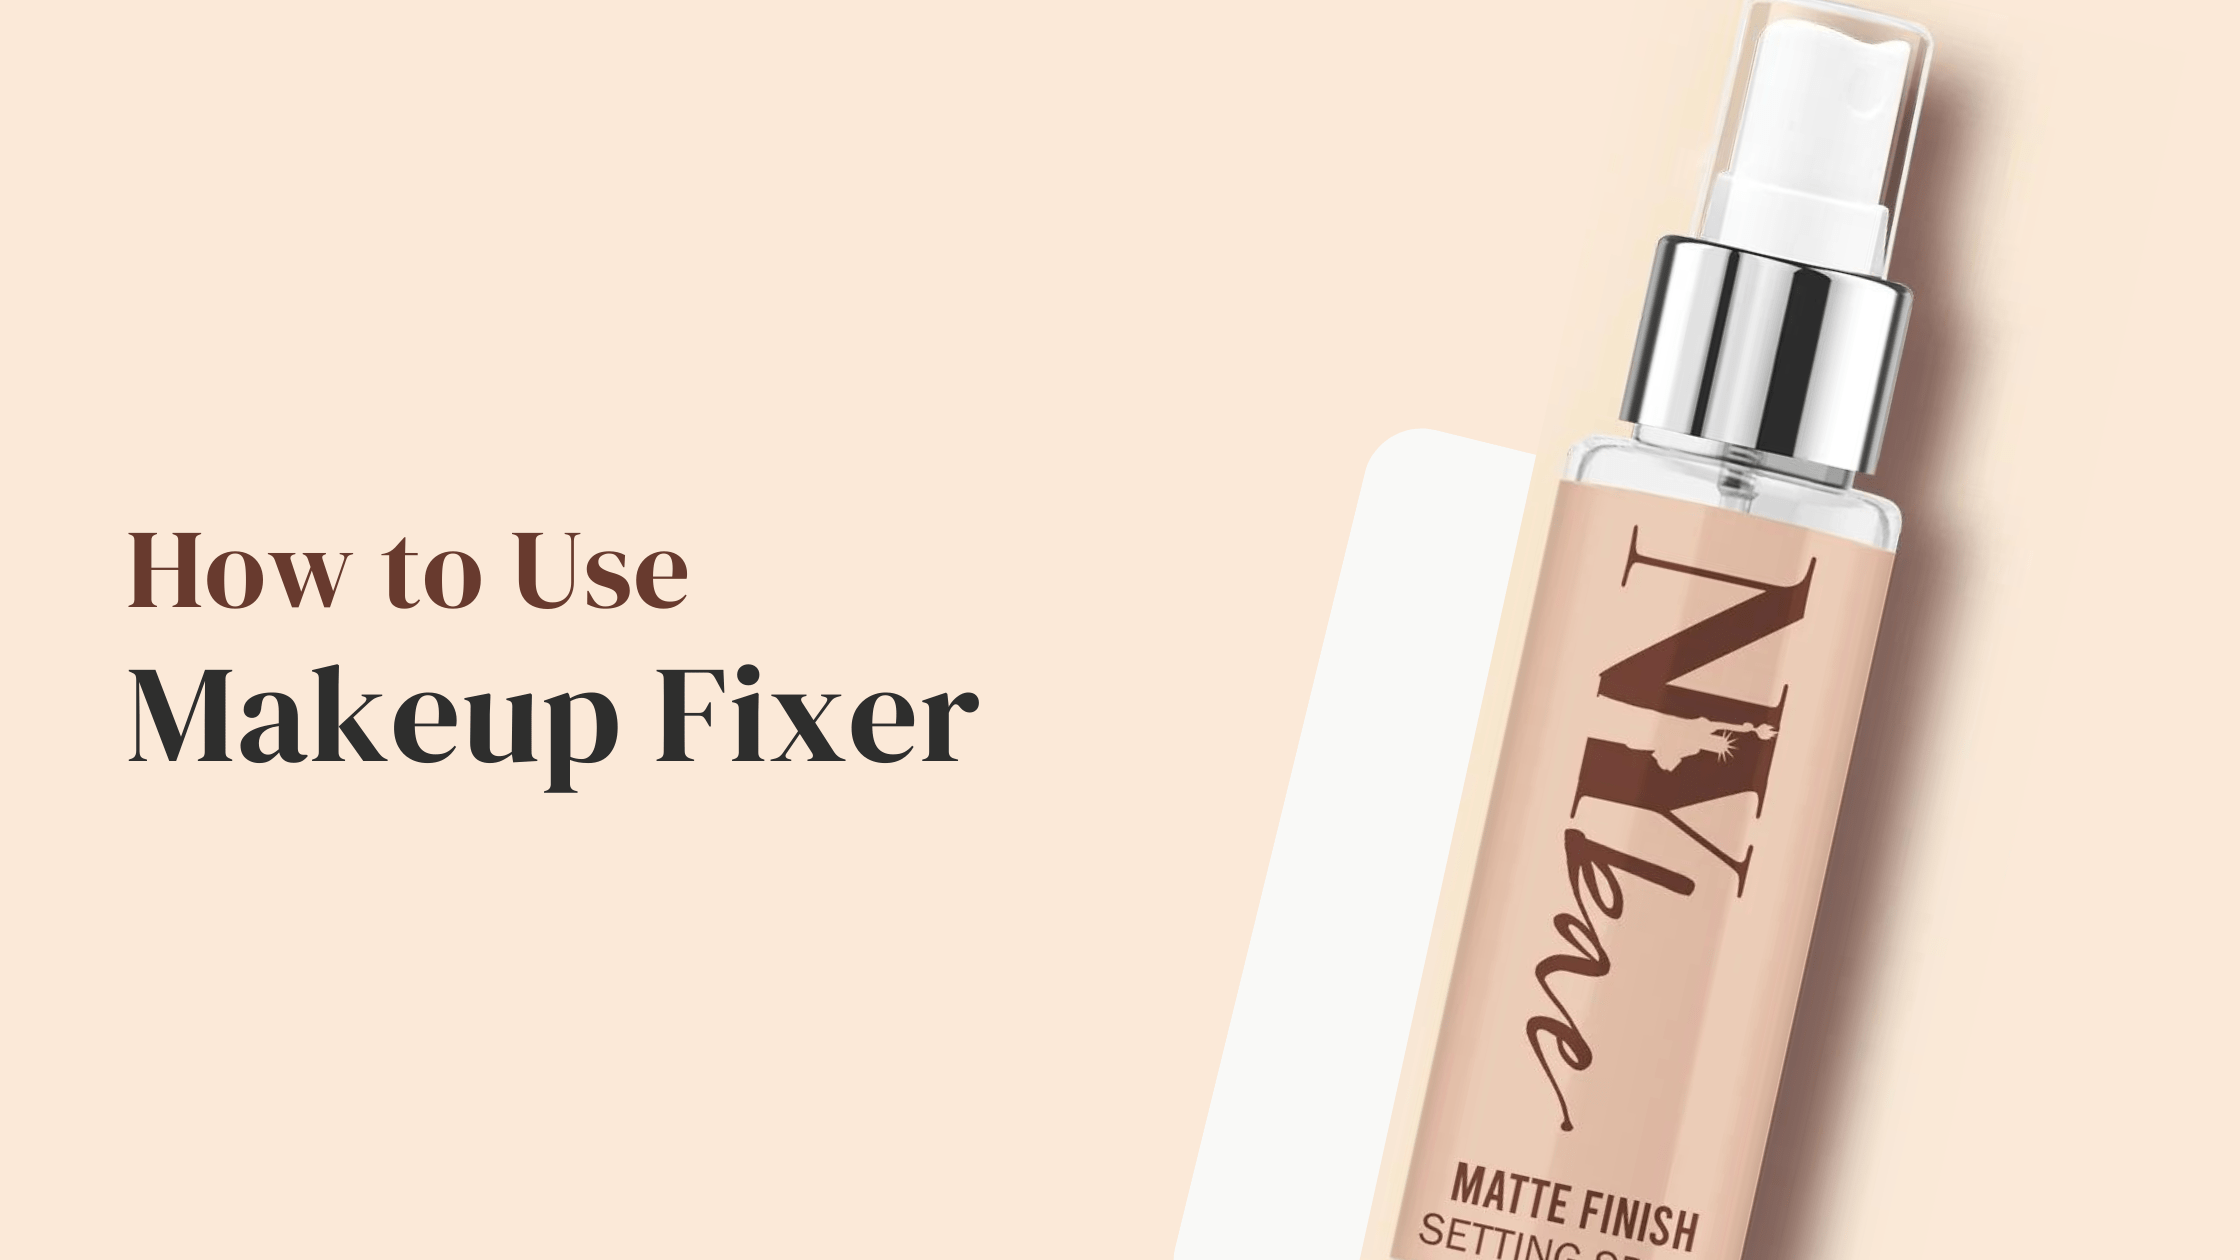 How to Use Makeup Fixer